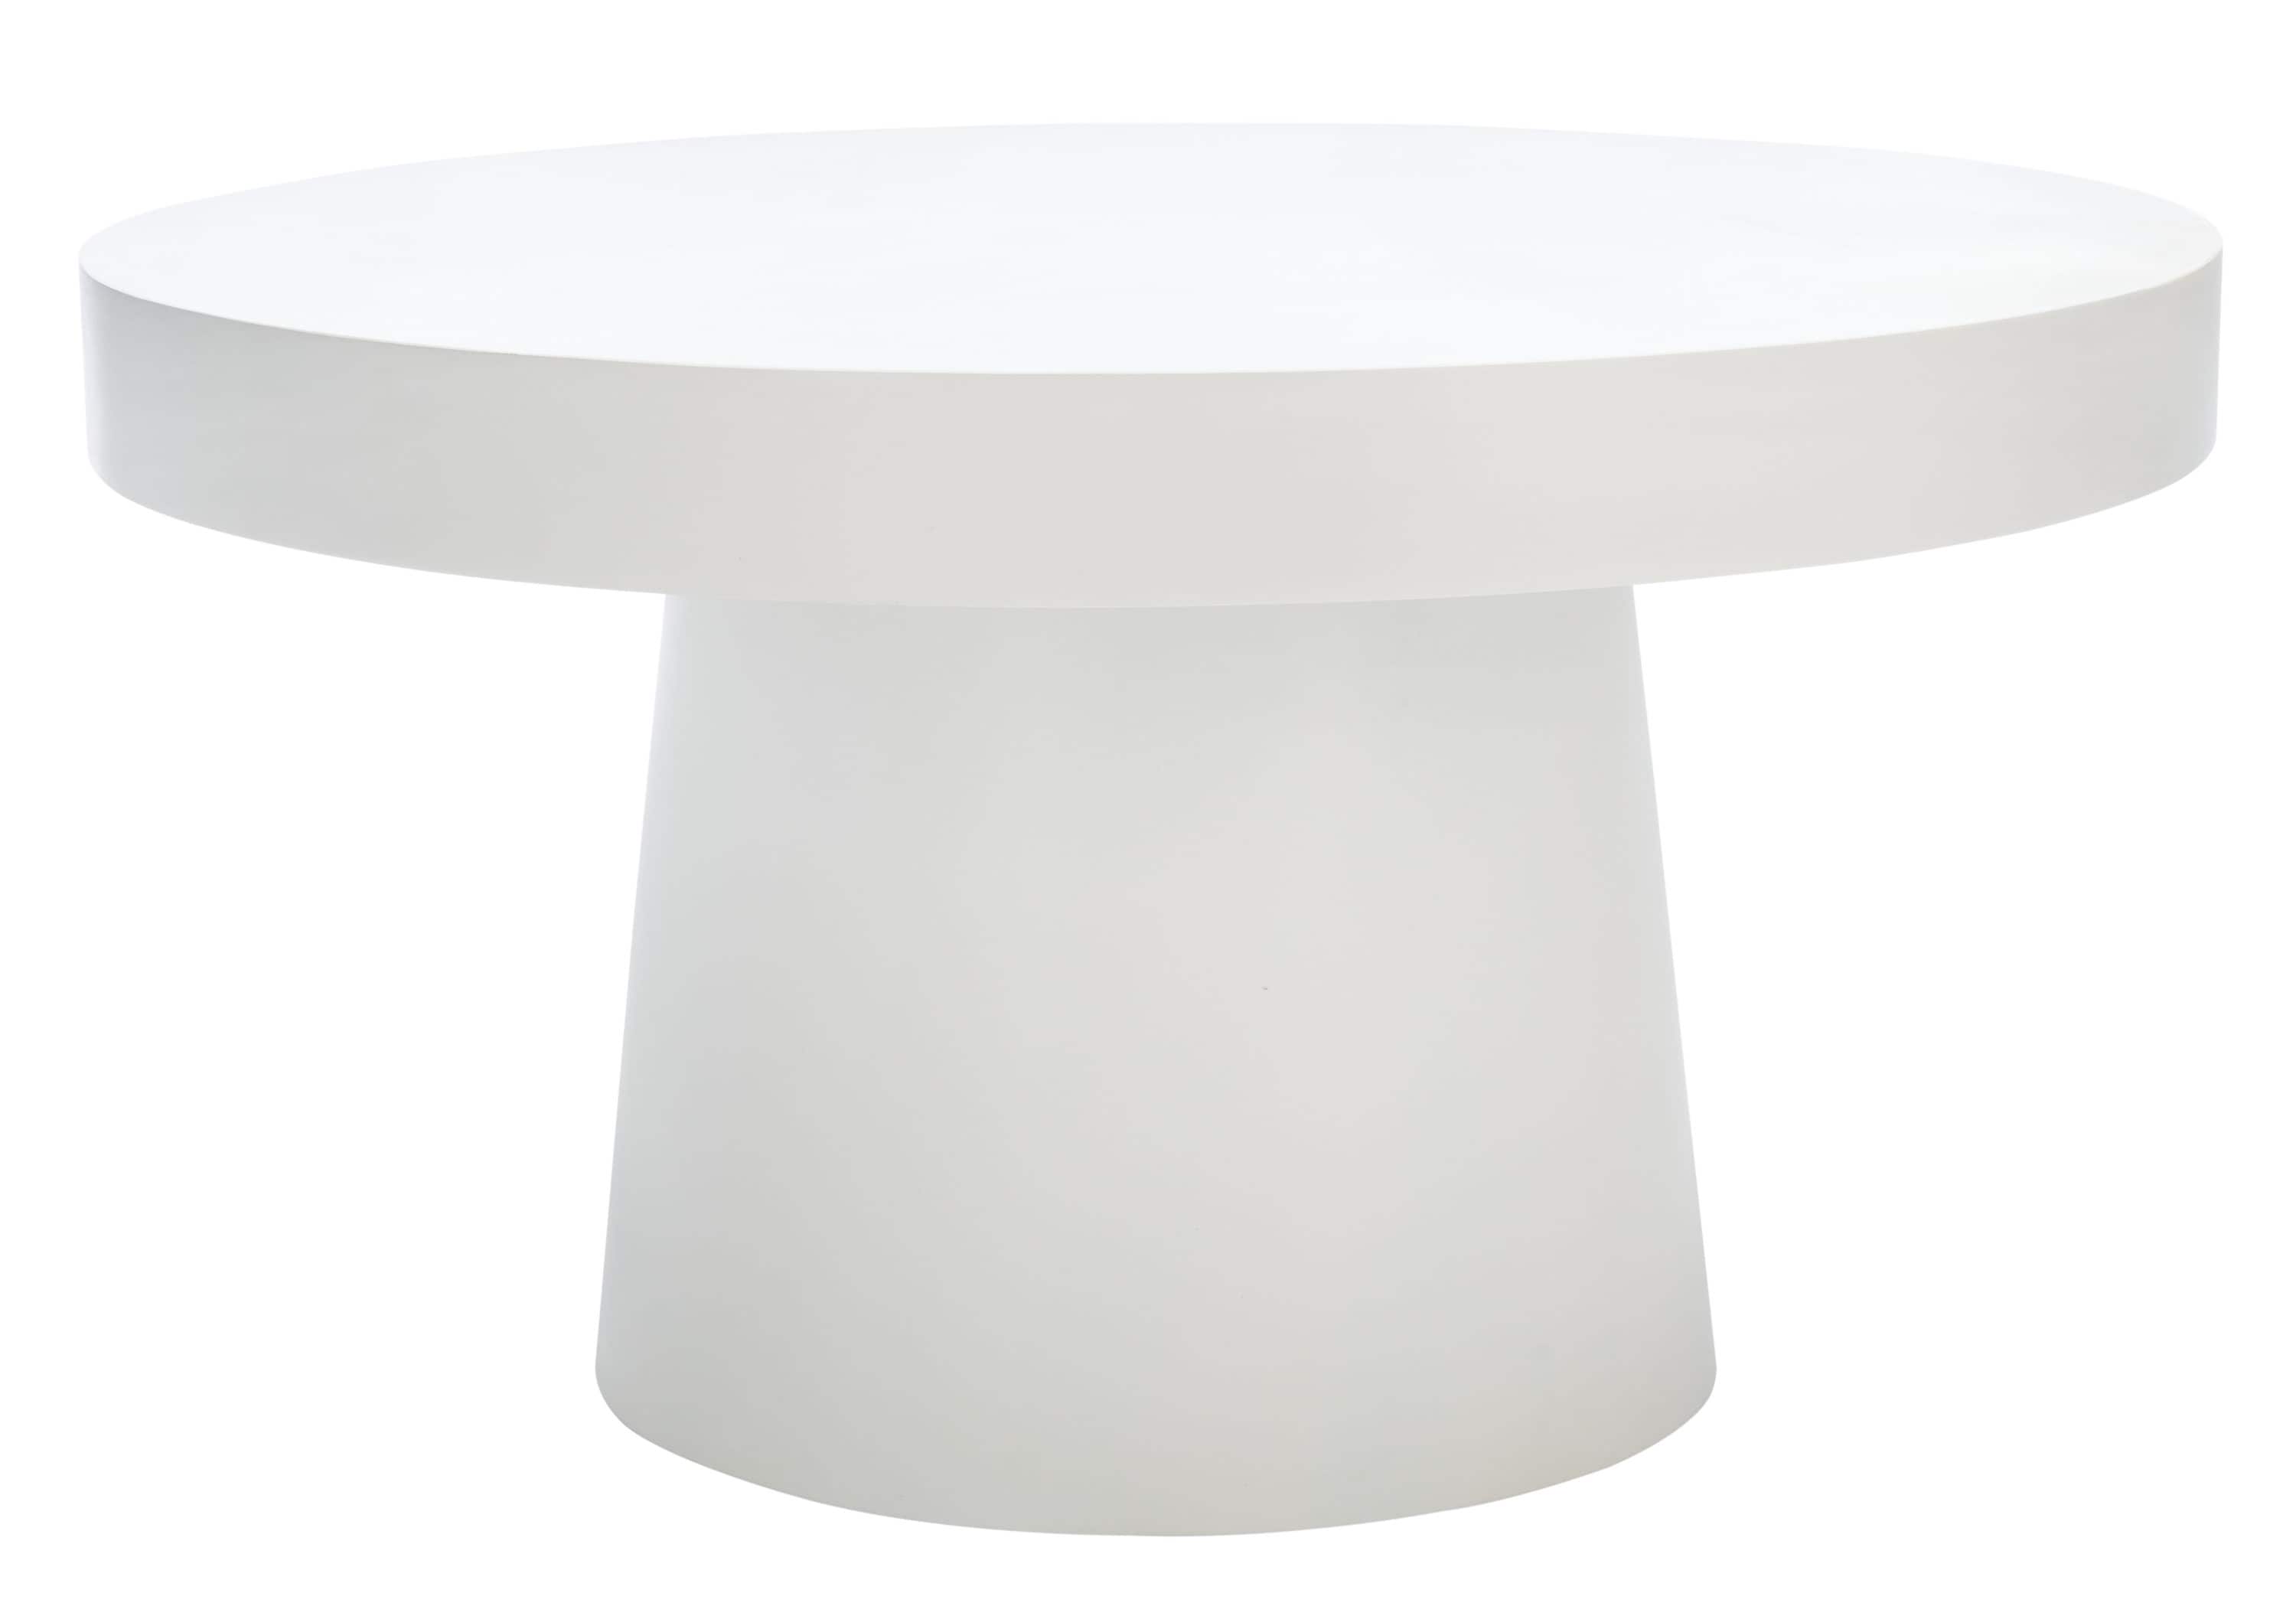 Petulance Baron bridge Safavieh Jaria White Modern Coffee Table in the Coffee Tables department at  Lowes.com